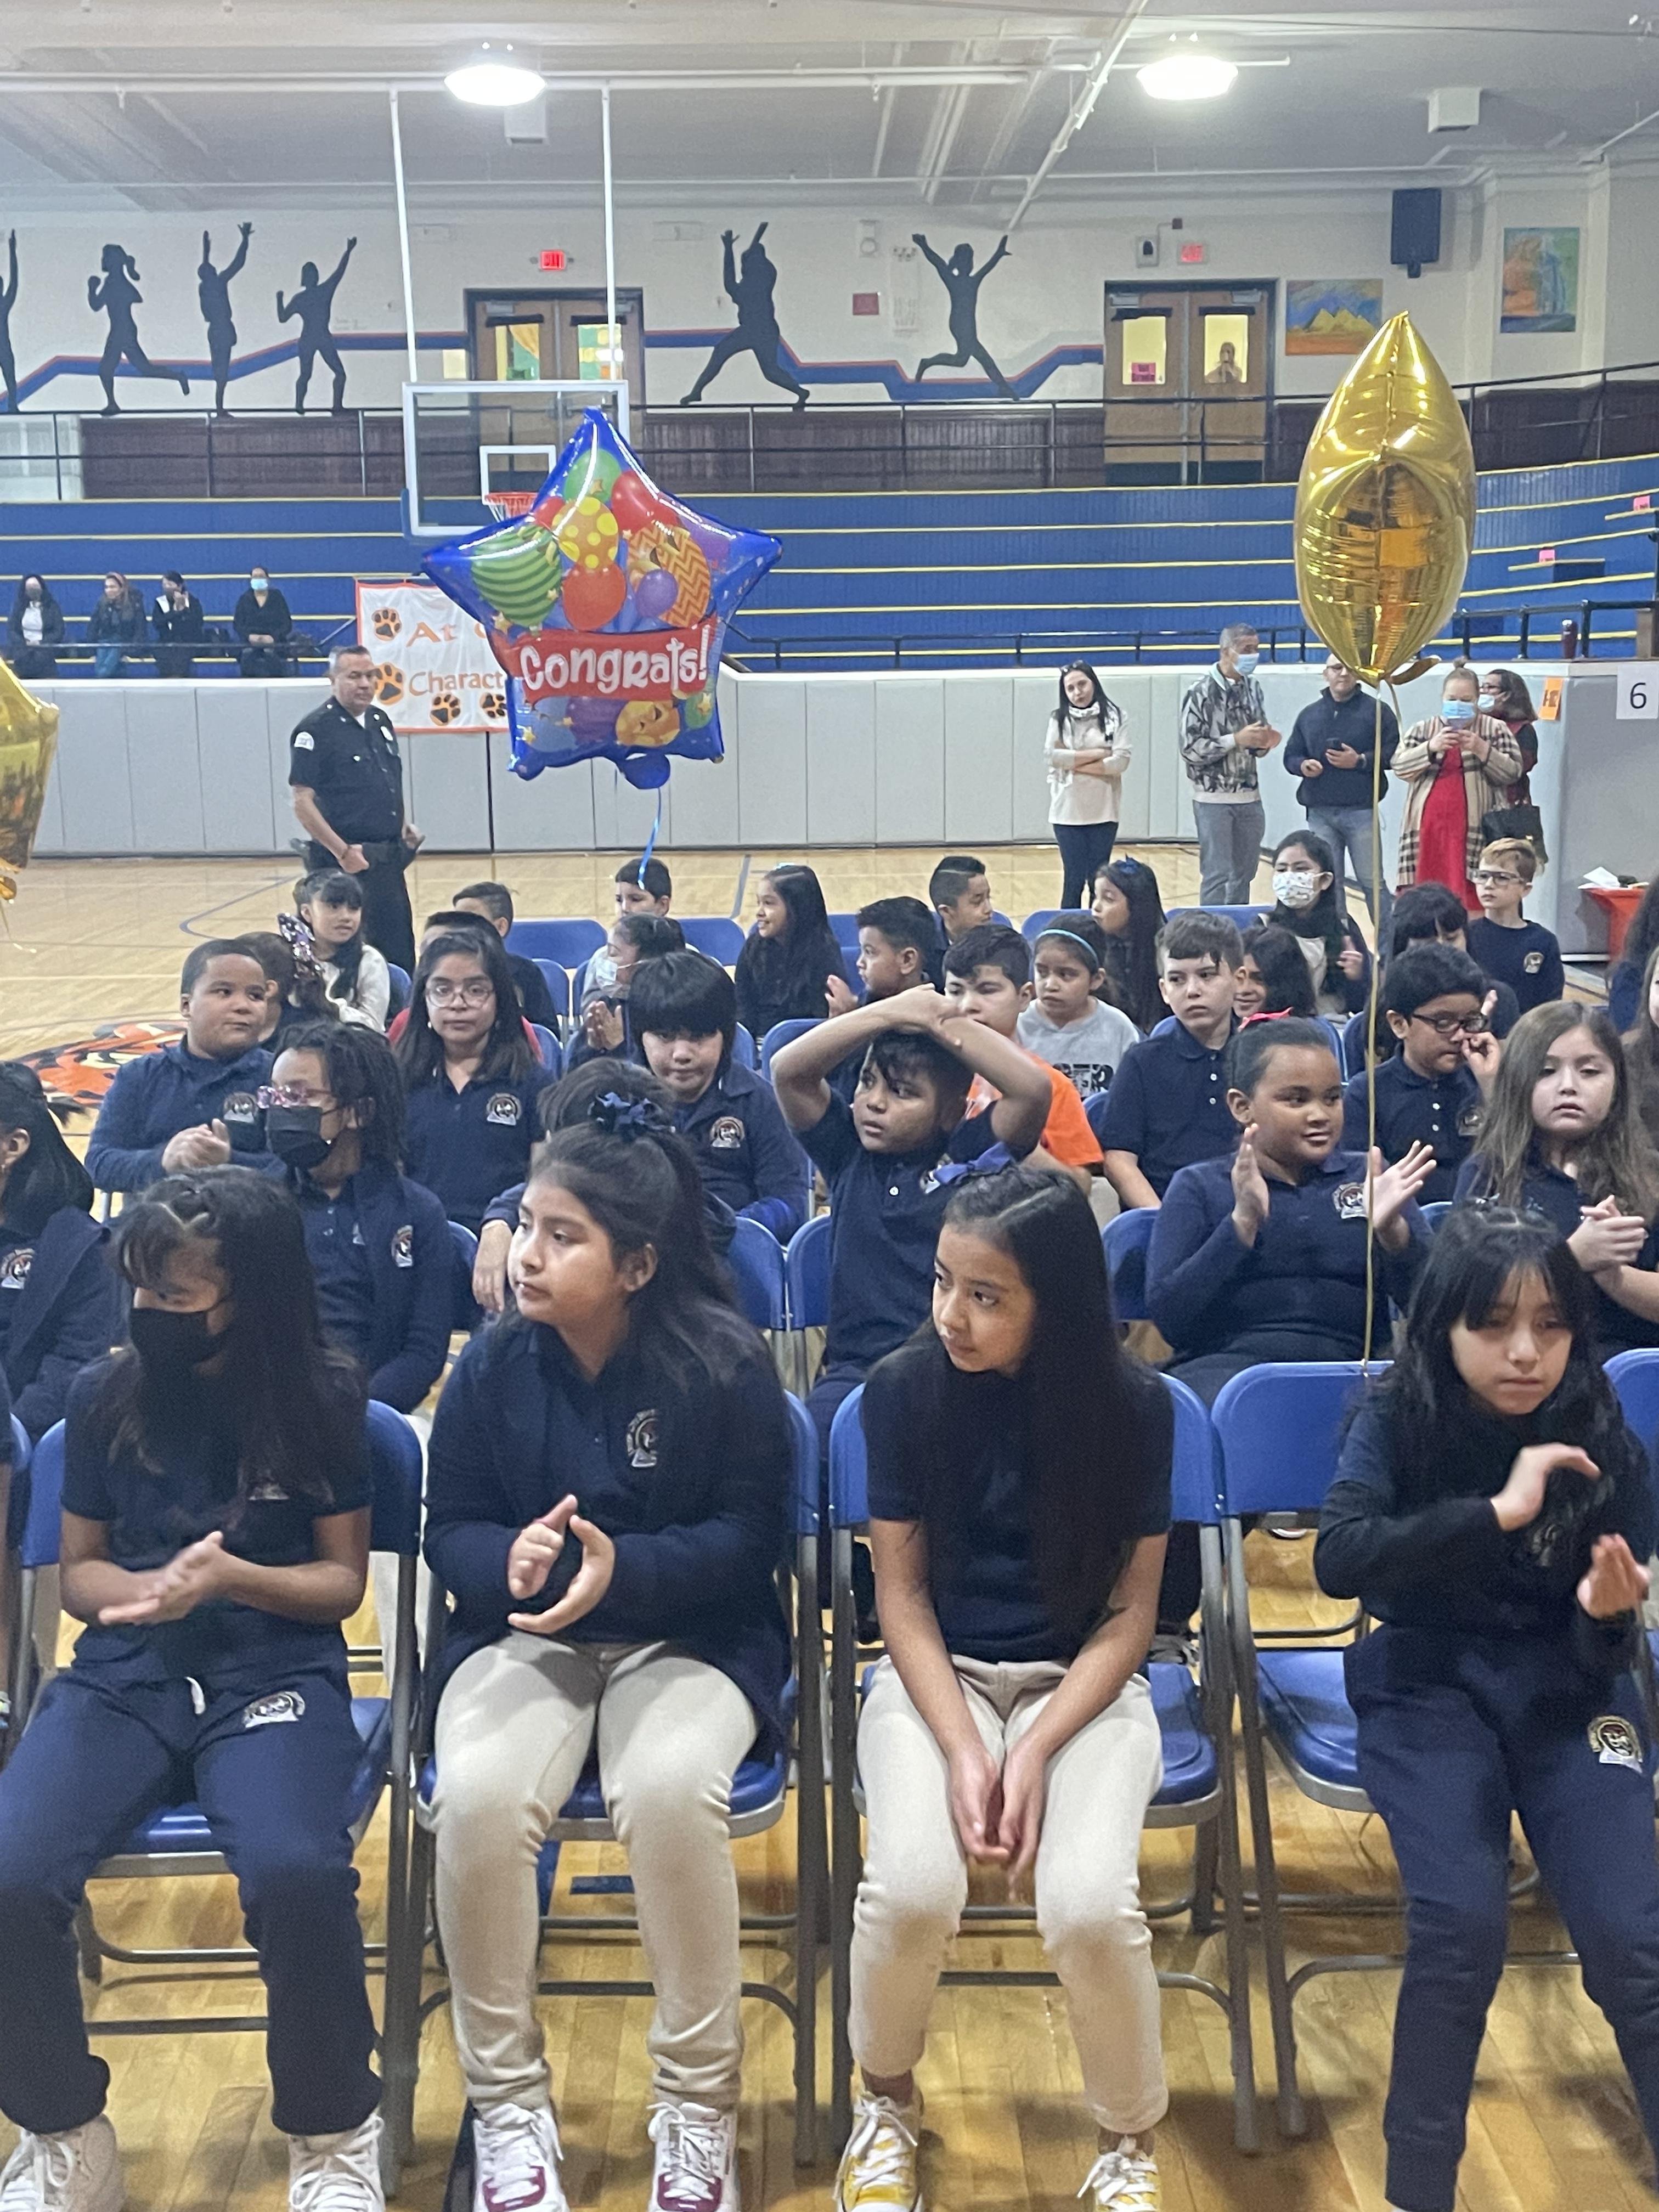 Students being honored at Washington School